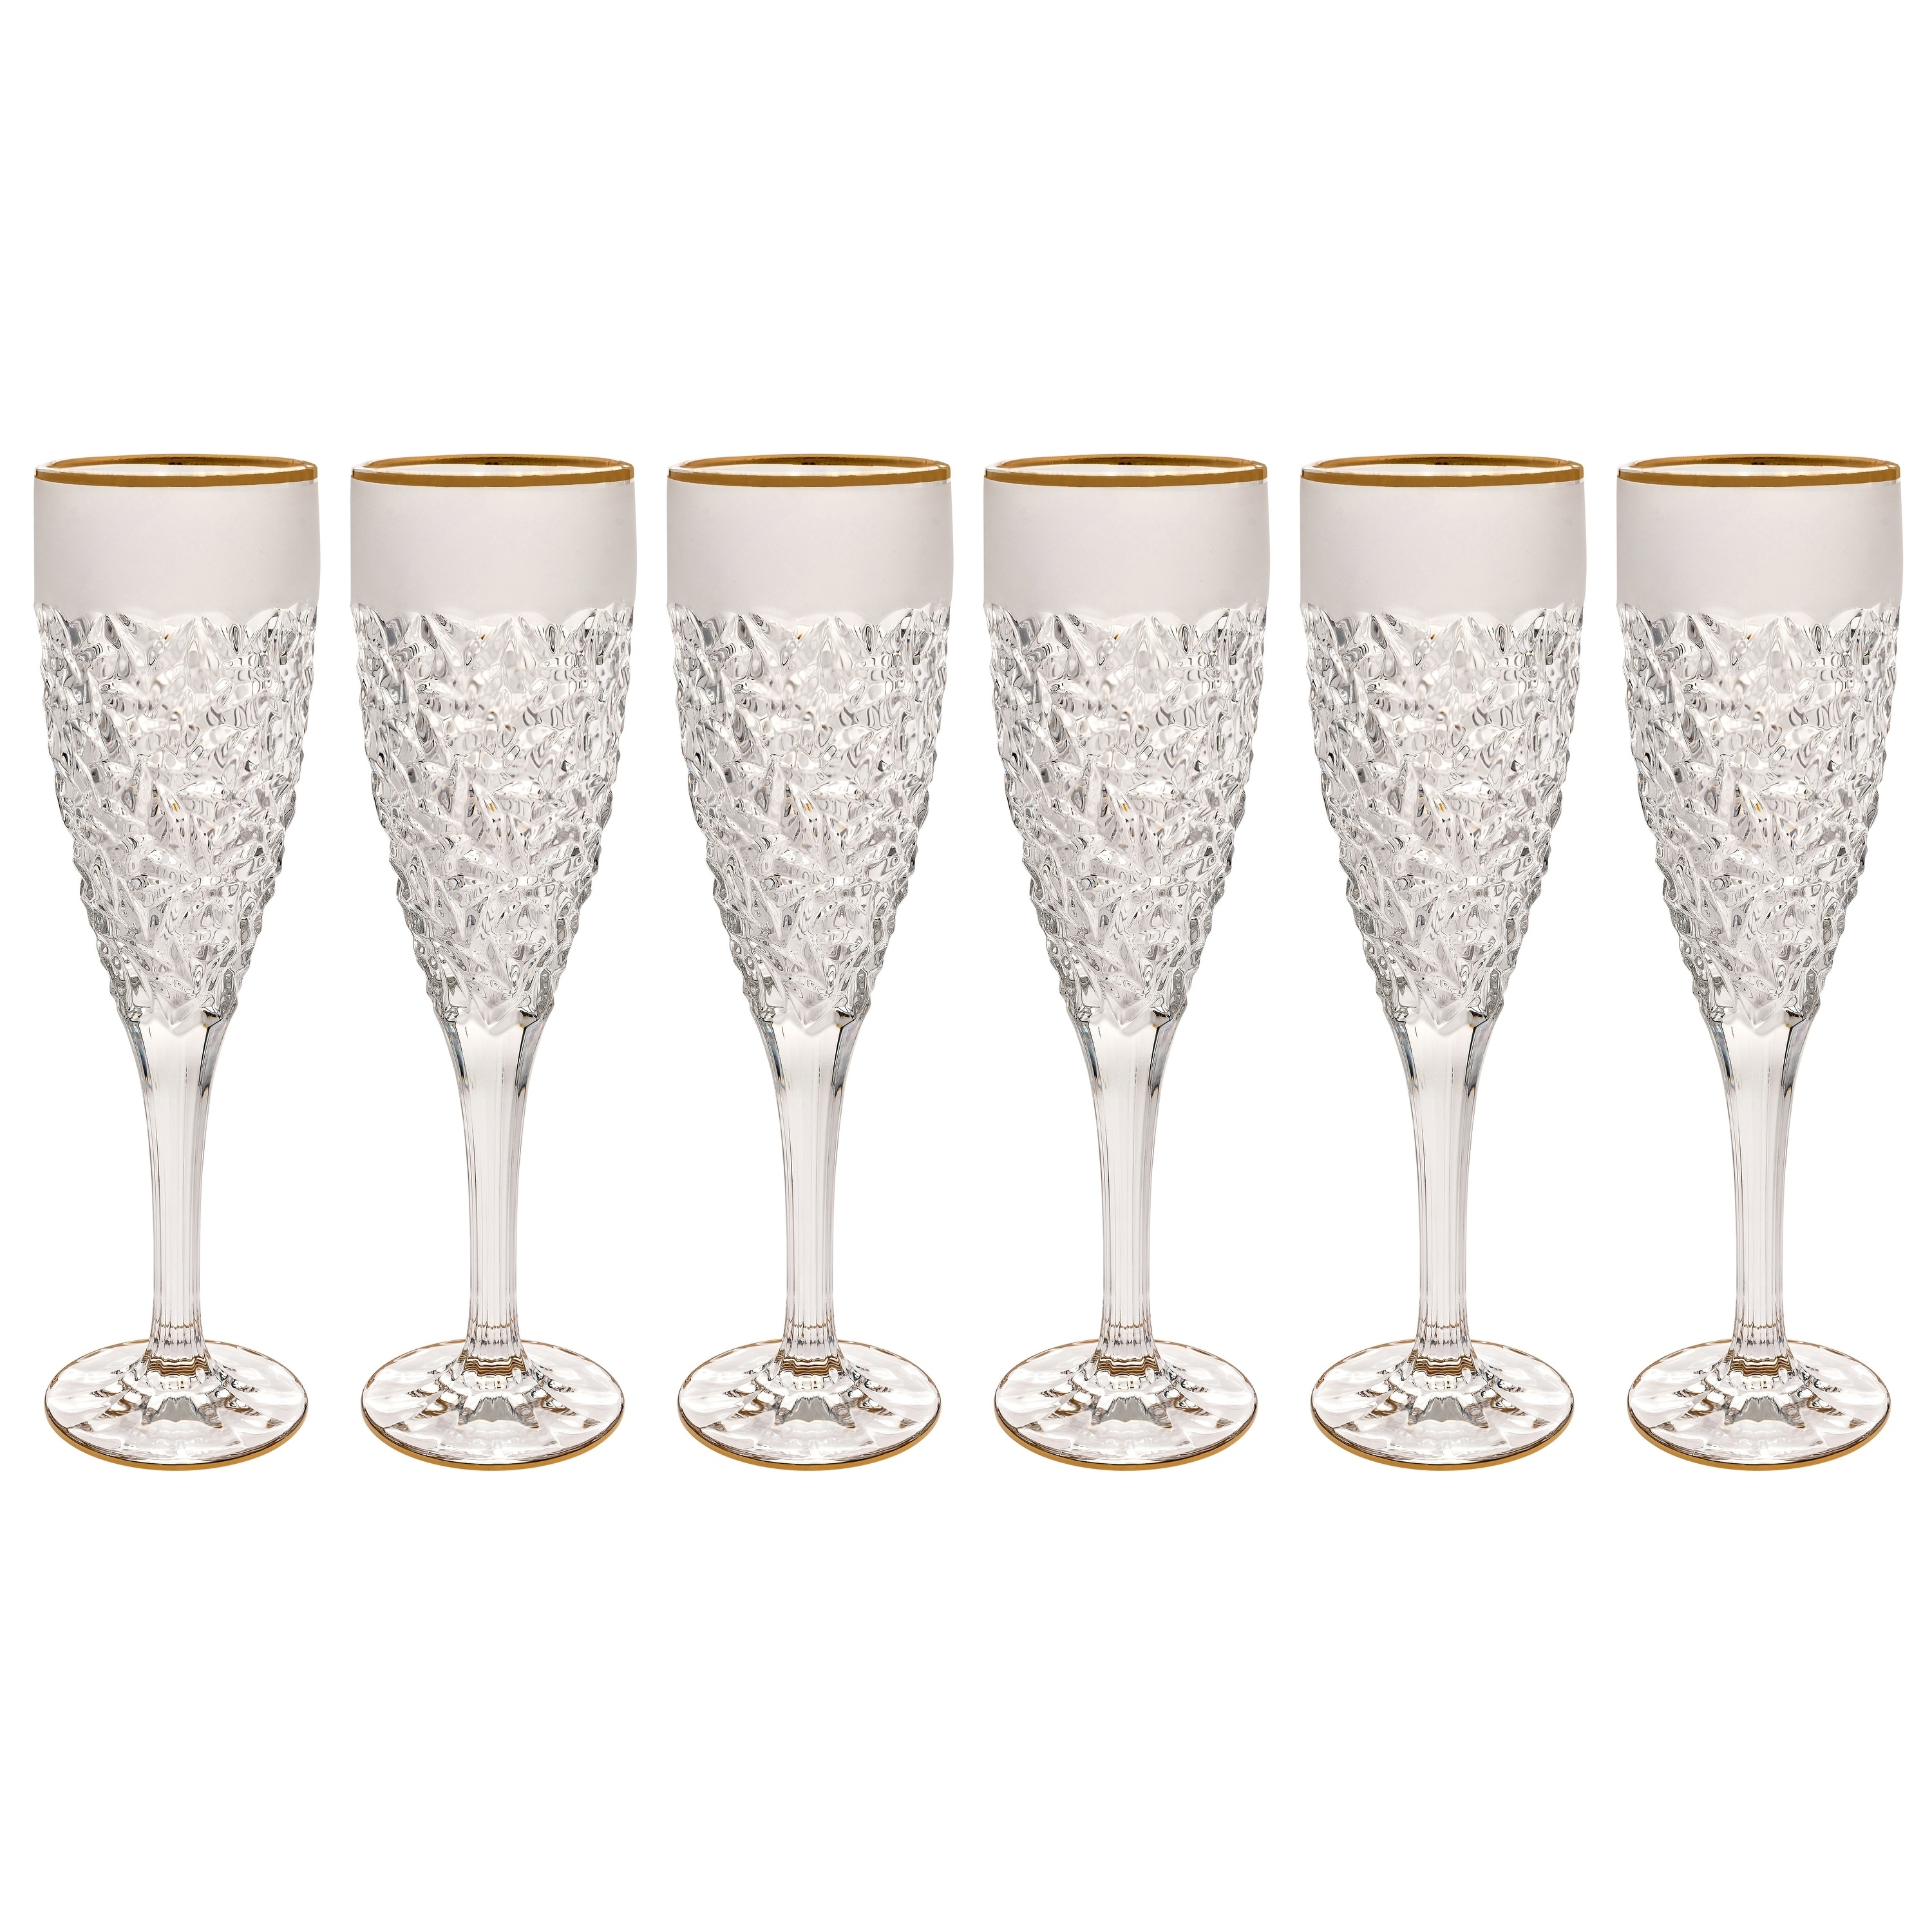 Majestic Gifts Inc. Set of 6 Crystal Flutes 8 ounces